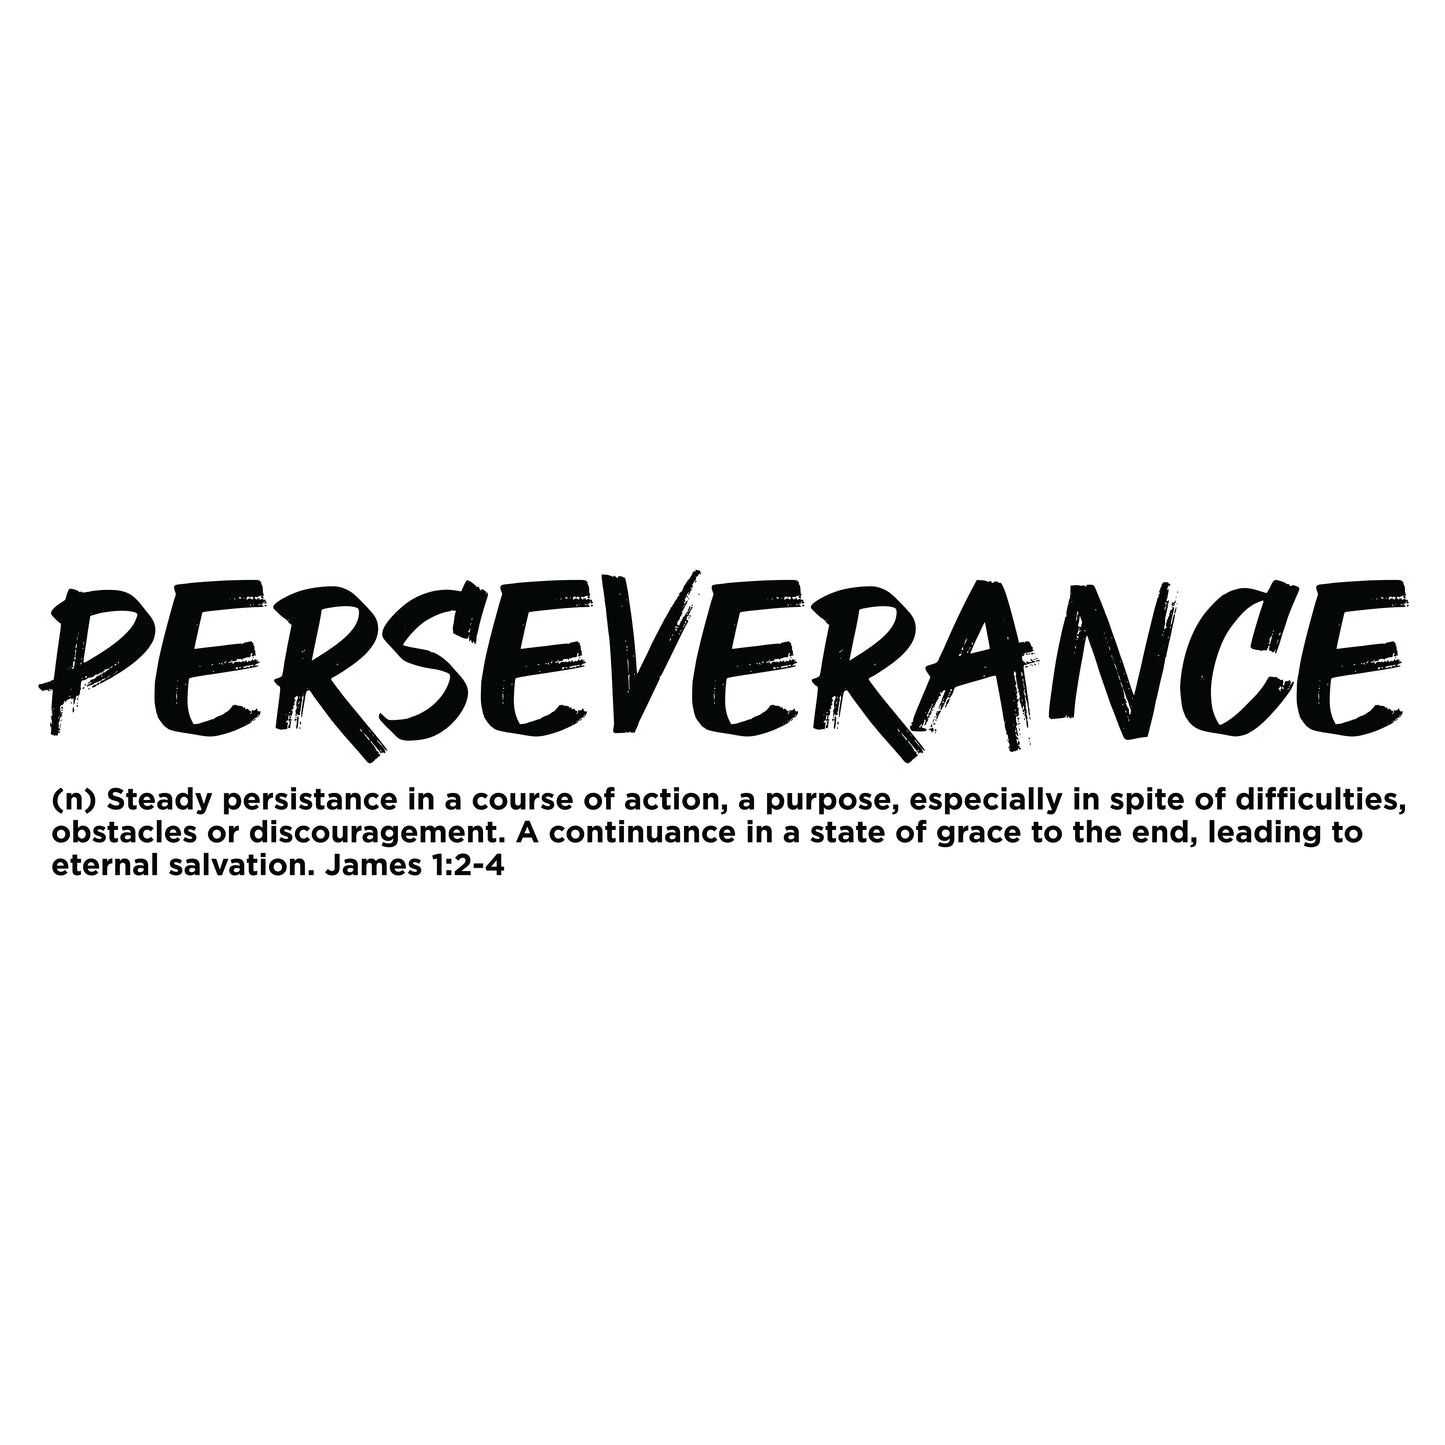 LS Hooded Performance "Perseverance"